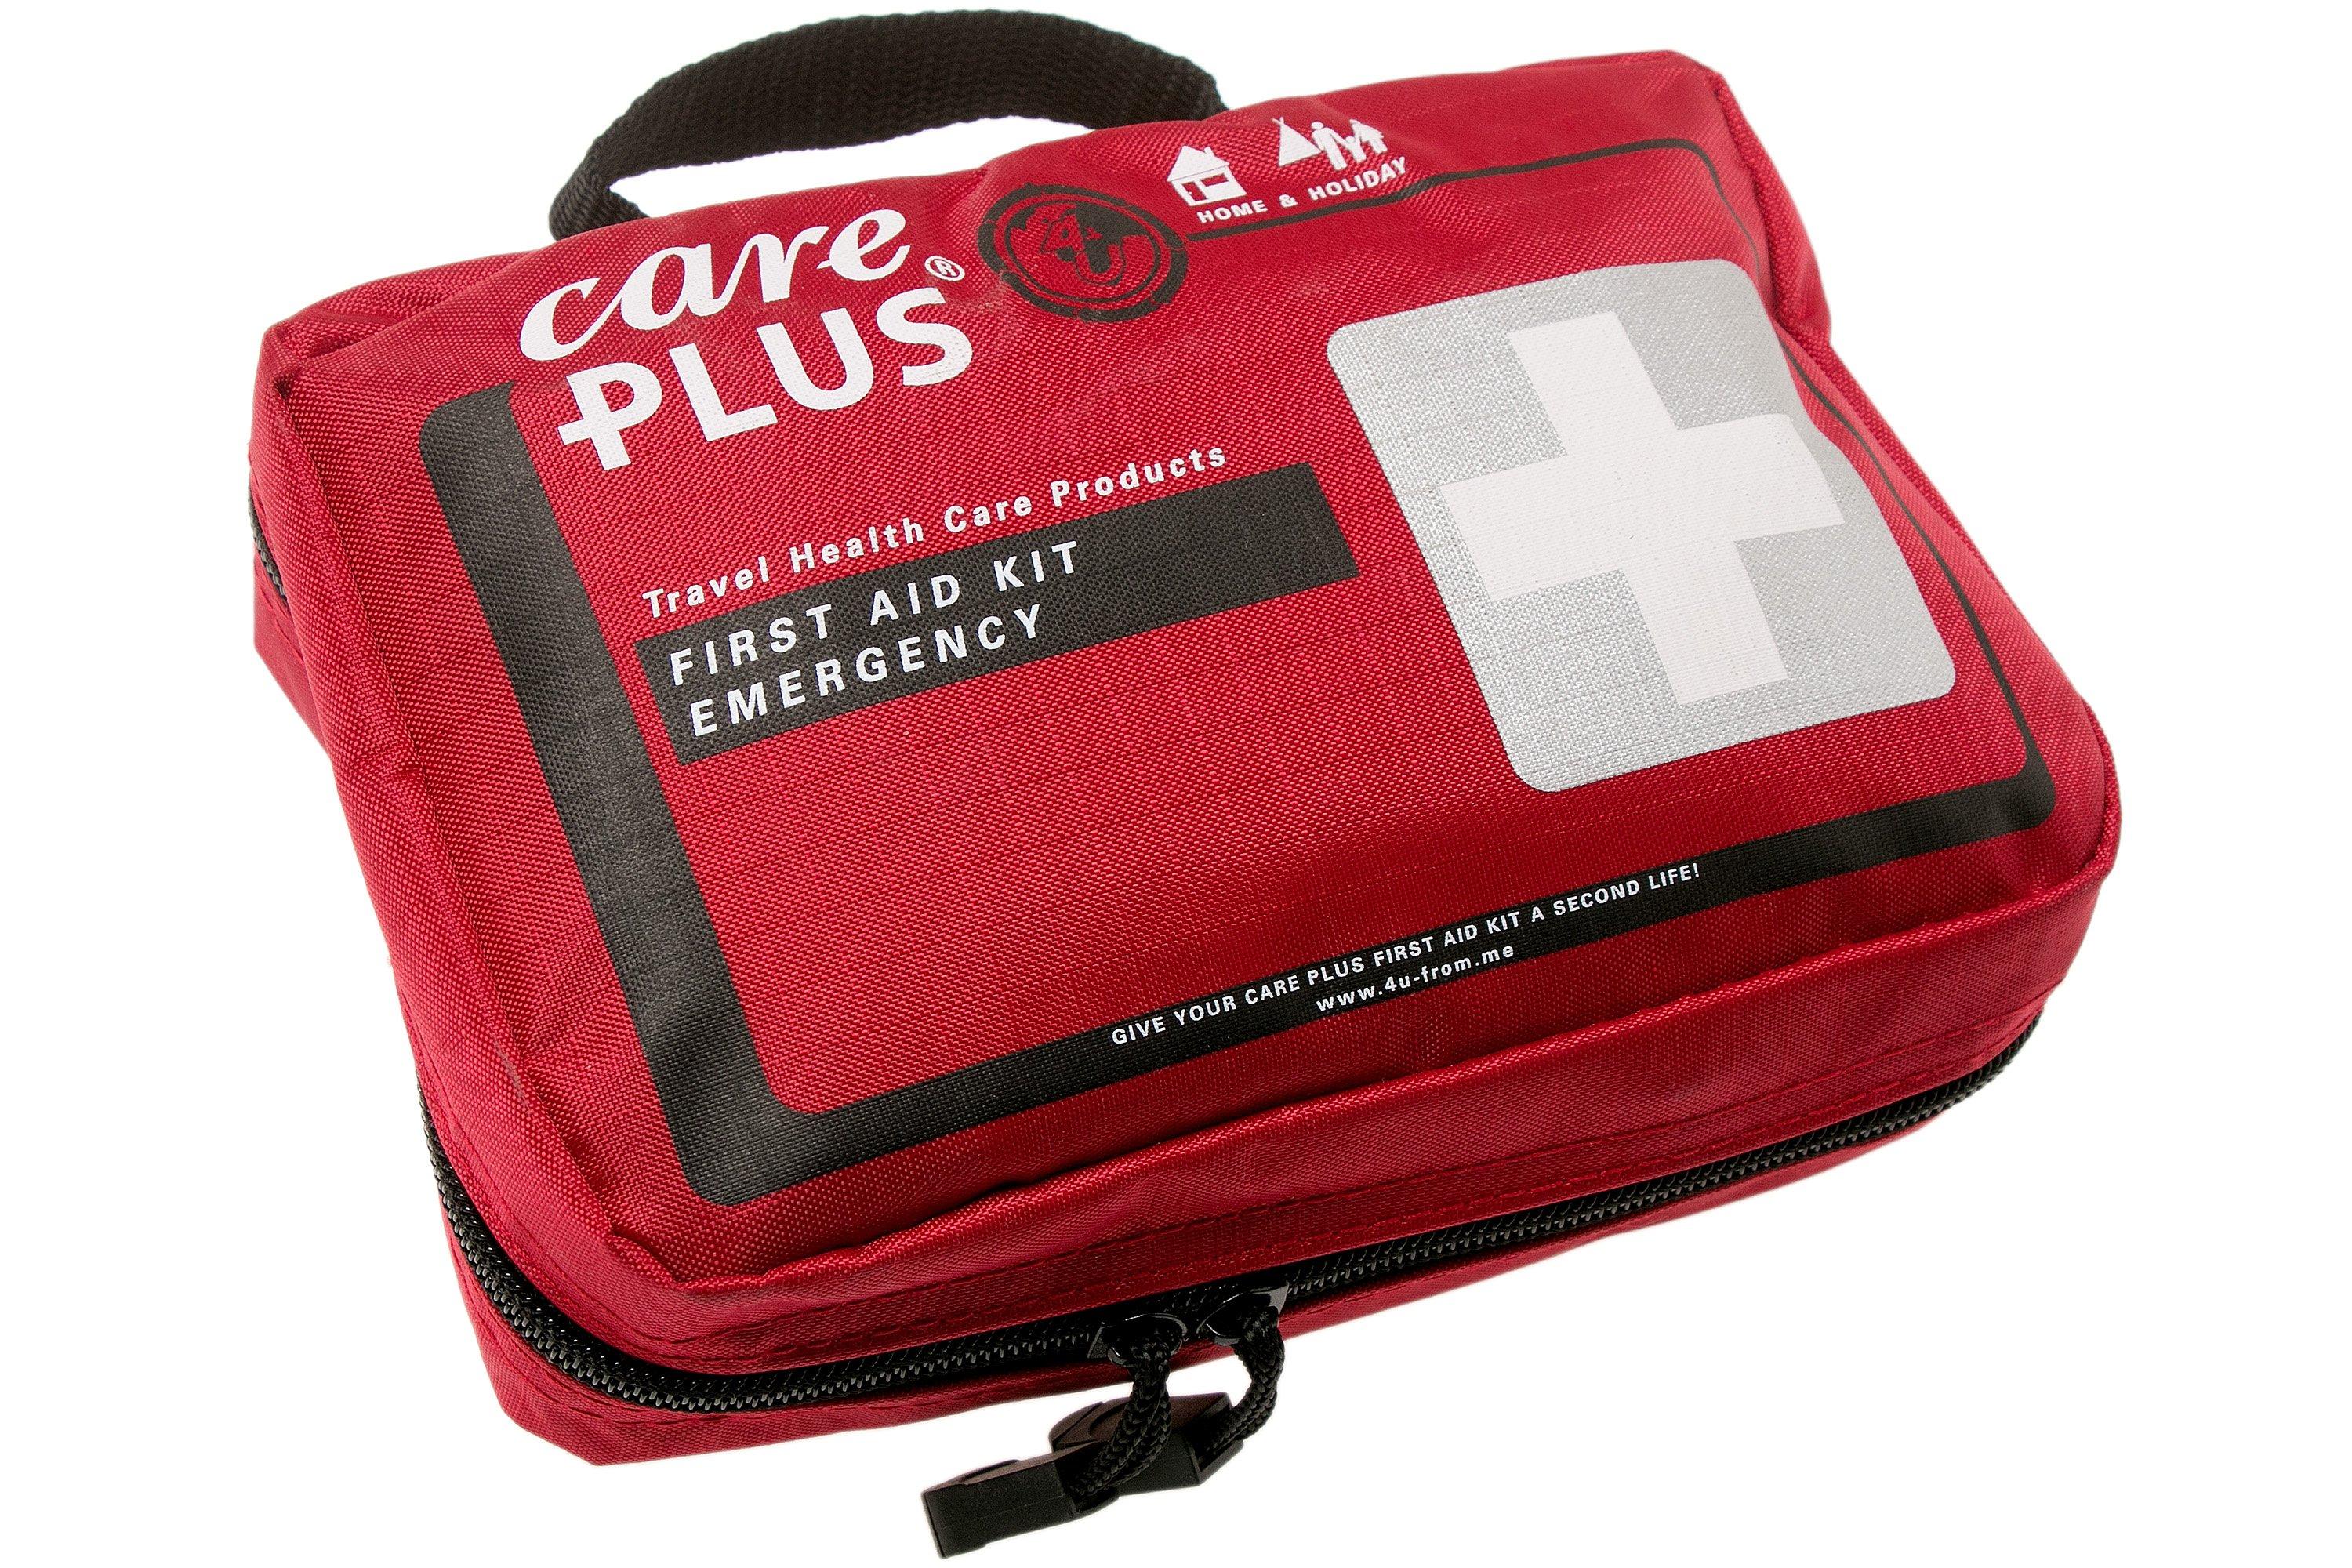 Care Plus First Aid Kit Emergency, extensive first kit | Advantageously shopping at